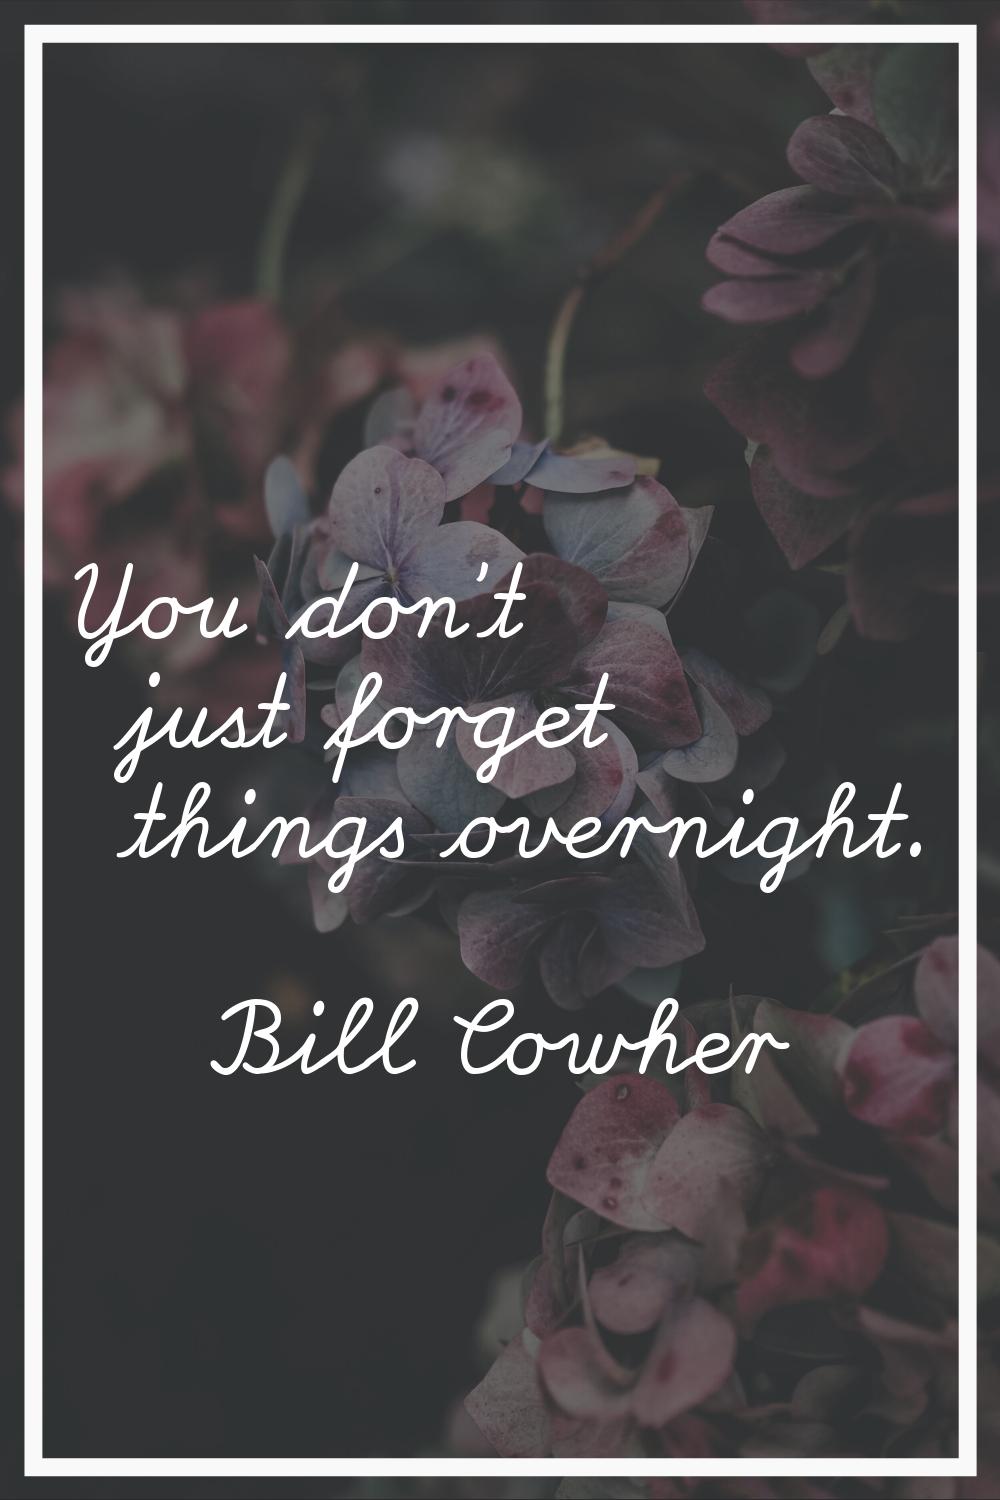 You don't just forget things overnight.